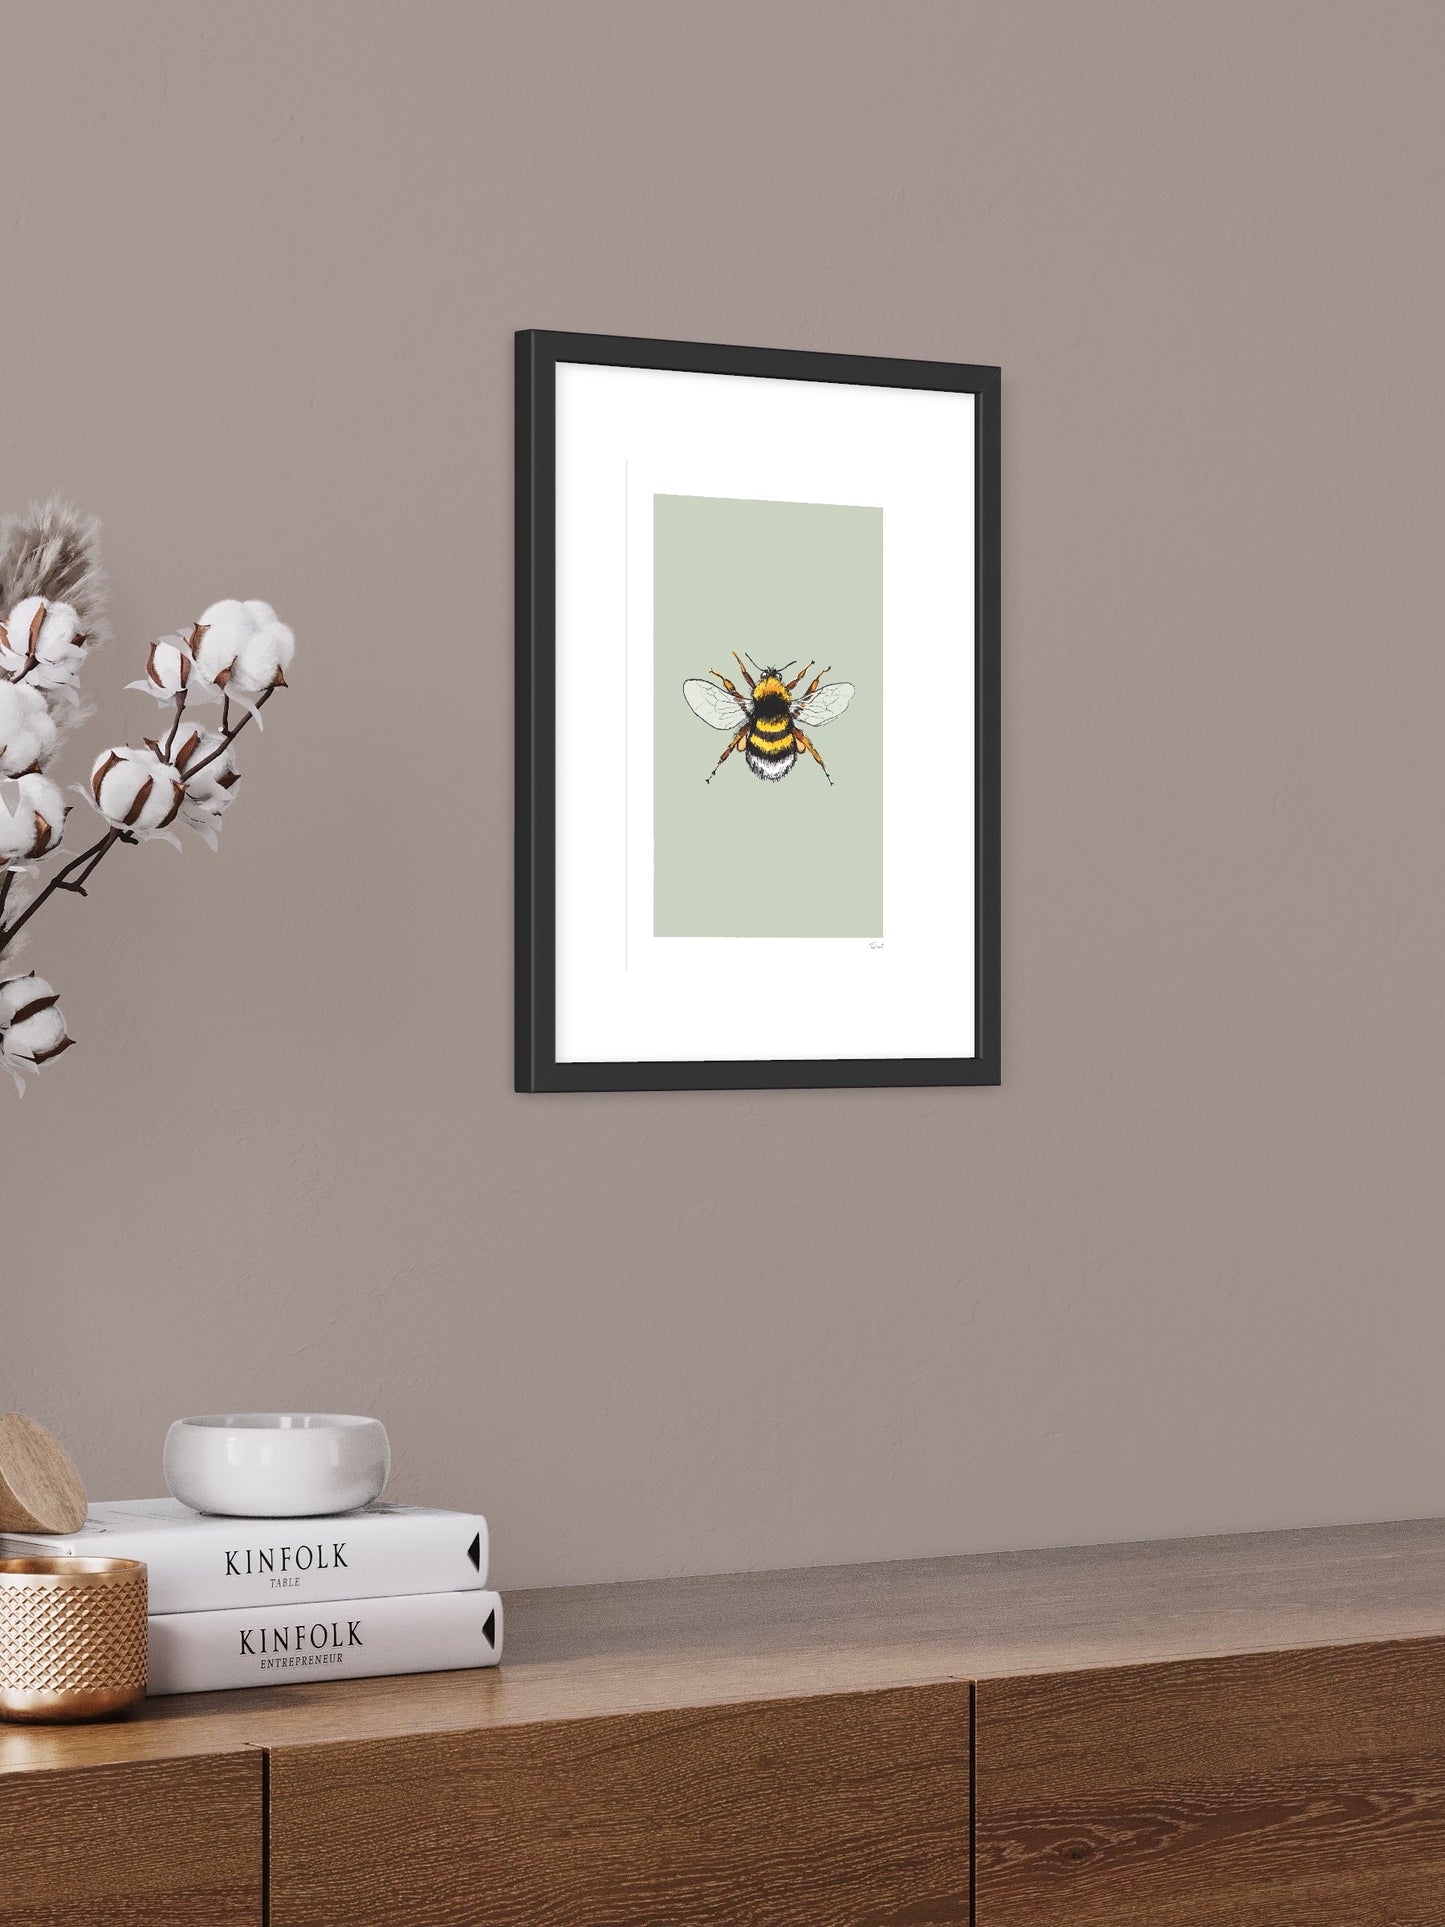 This image shows a giclee wall art print by Tom Laird Illustration of a Bumblebee, framed in a beautiful living room with tasteful modern home decor. This art print is available from Tom Laird Illustration in various sizes.